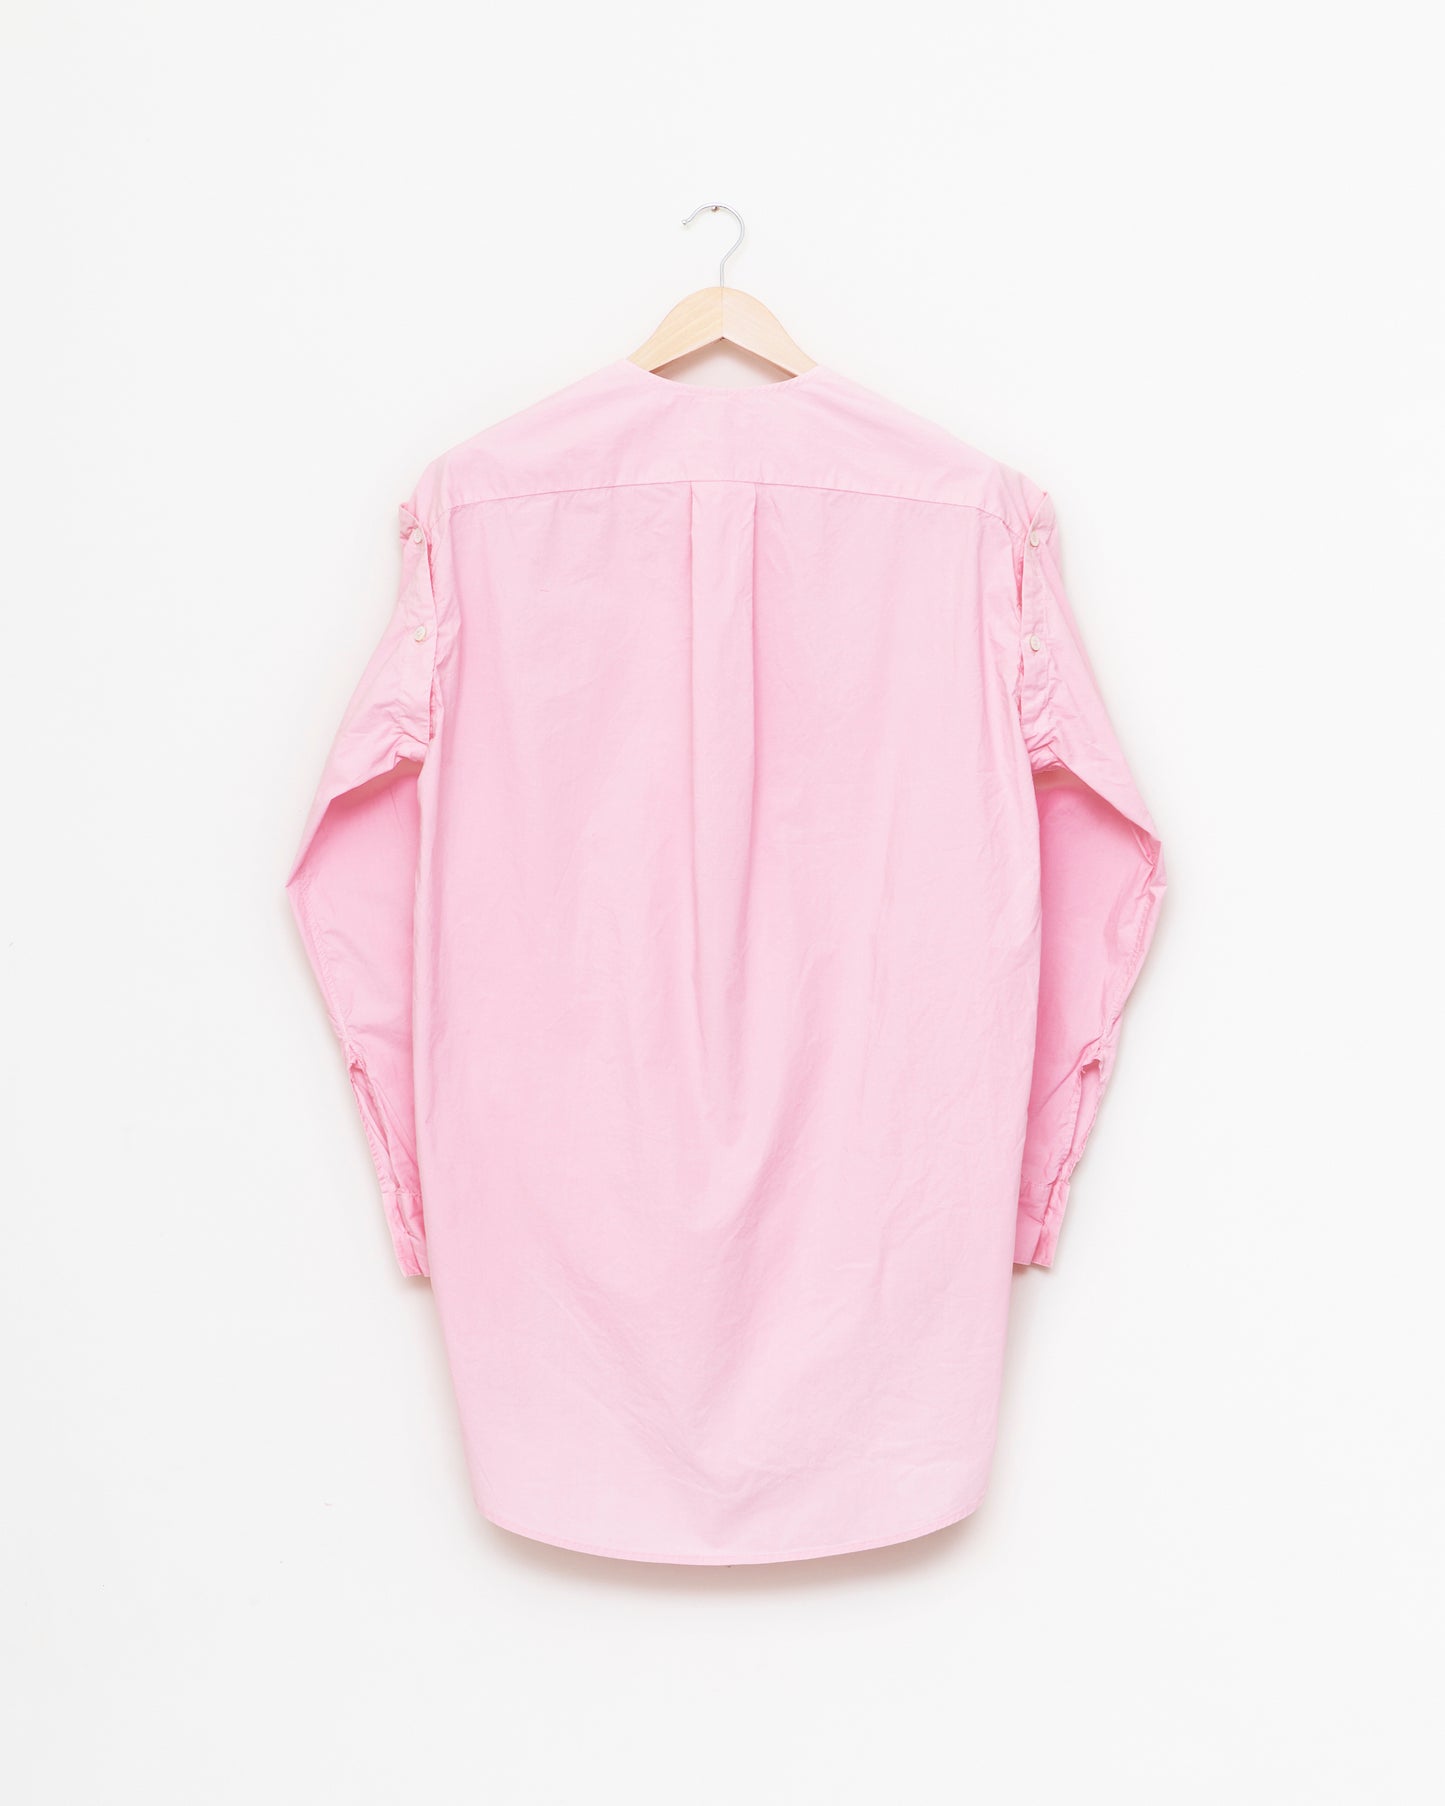 Hand-Tie Shirt in Paper Compact Cotton - Rose